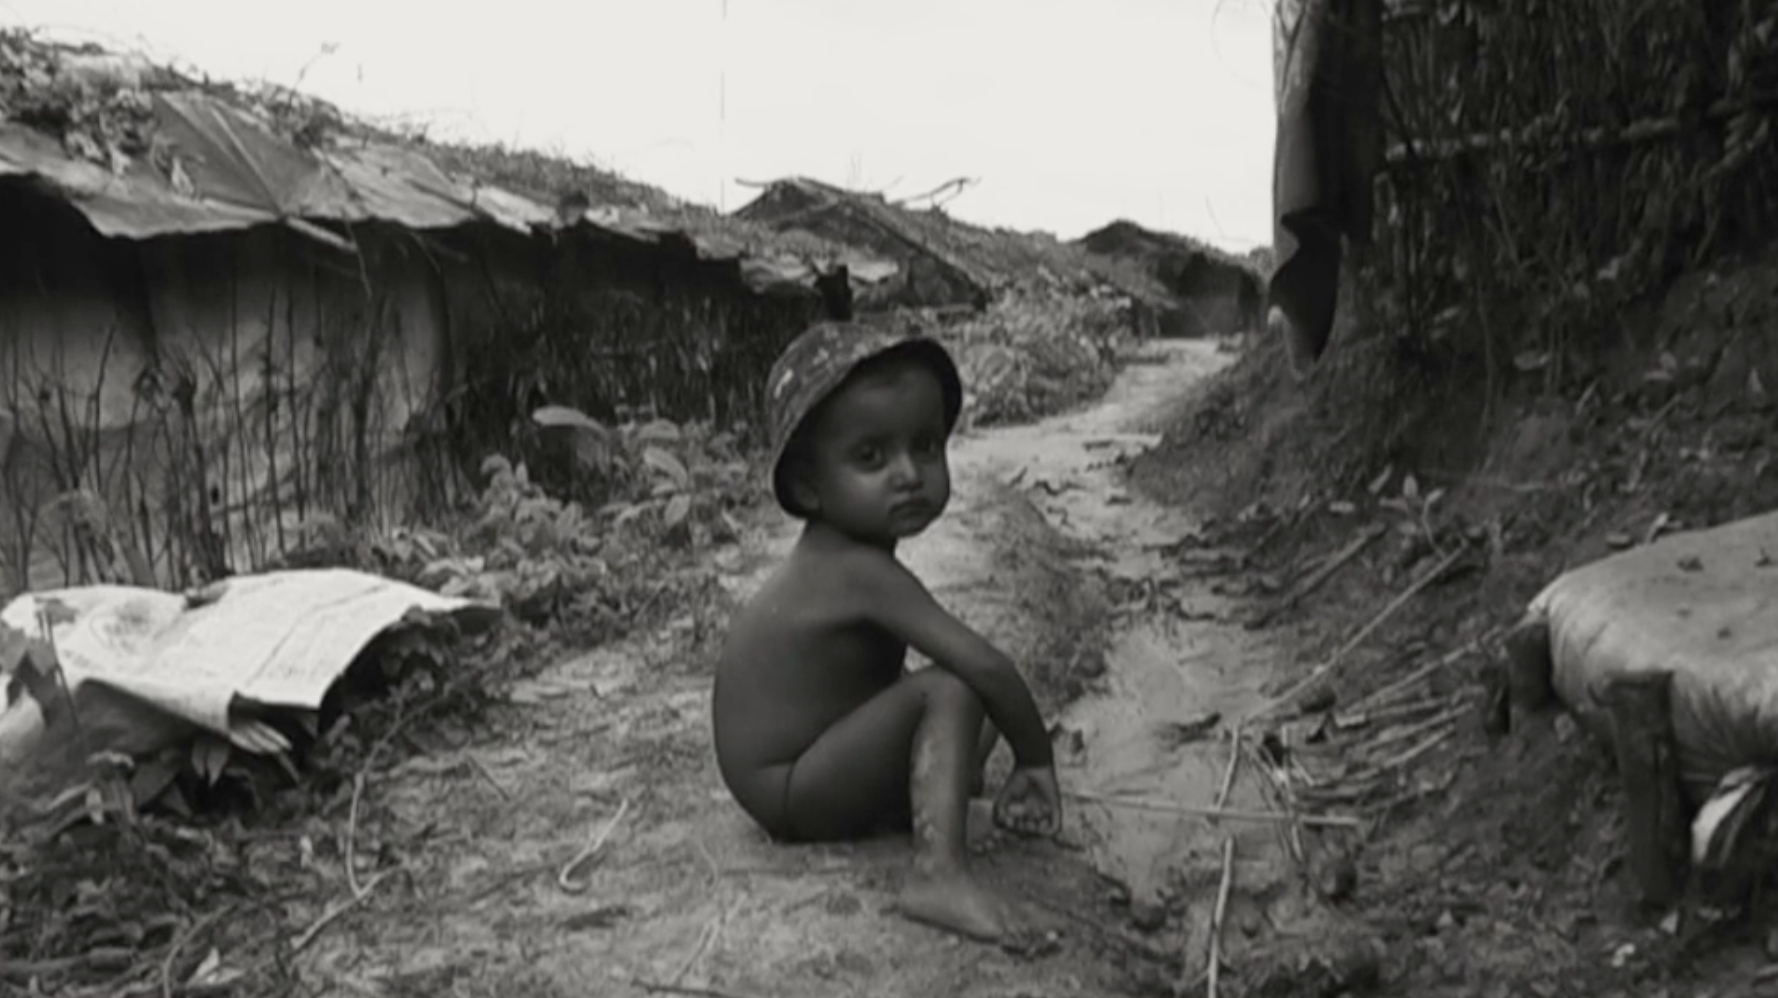 Still from “Exiled To Nowhere-Burma’s Rohingya” by Greg Constantine.